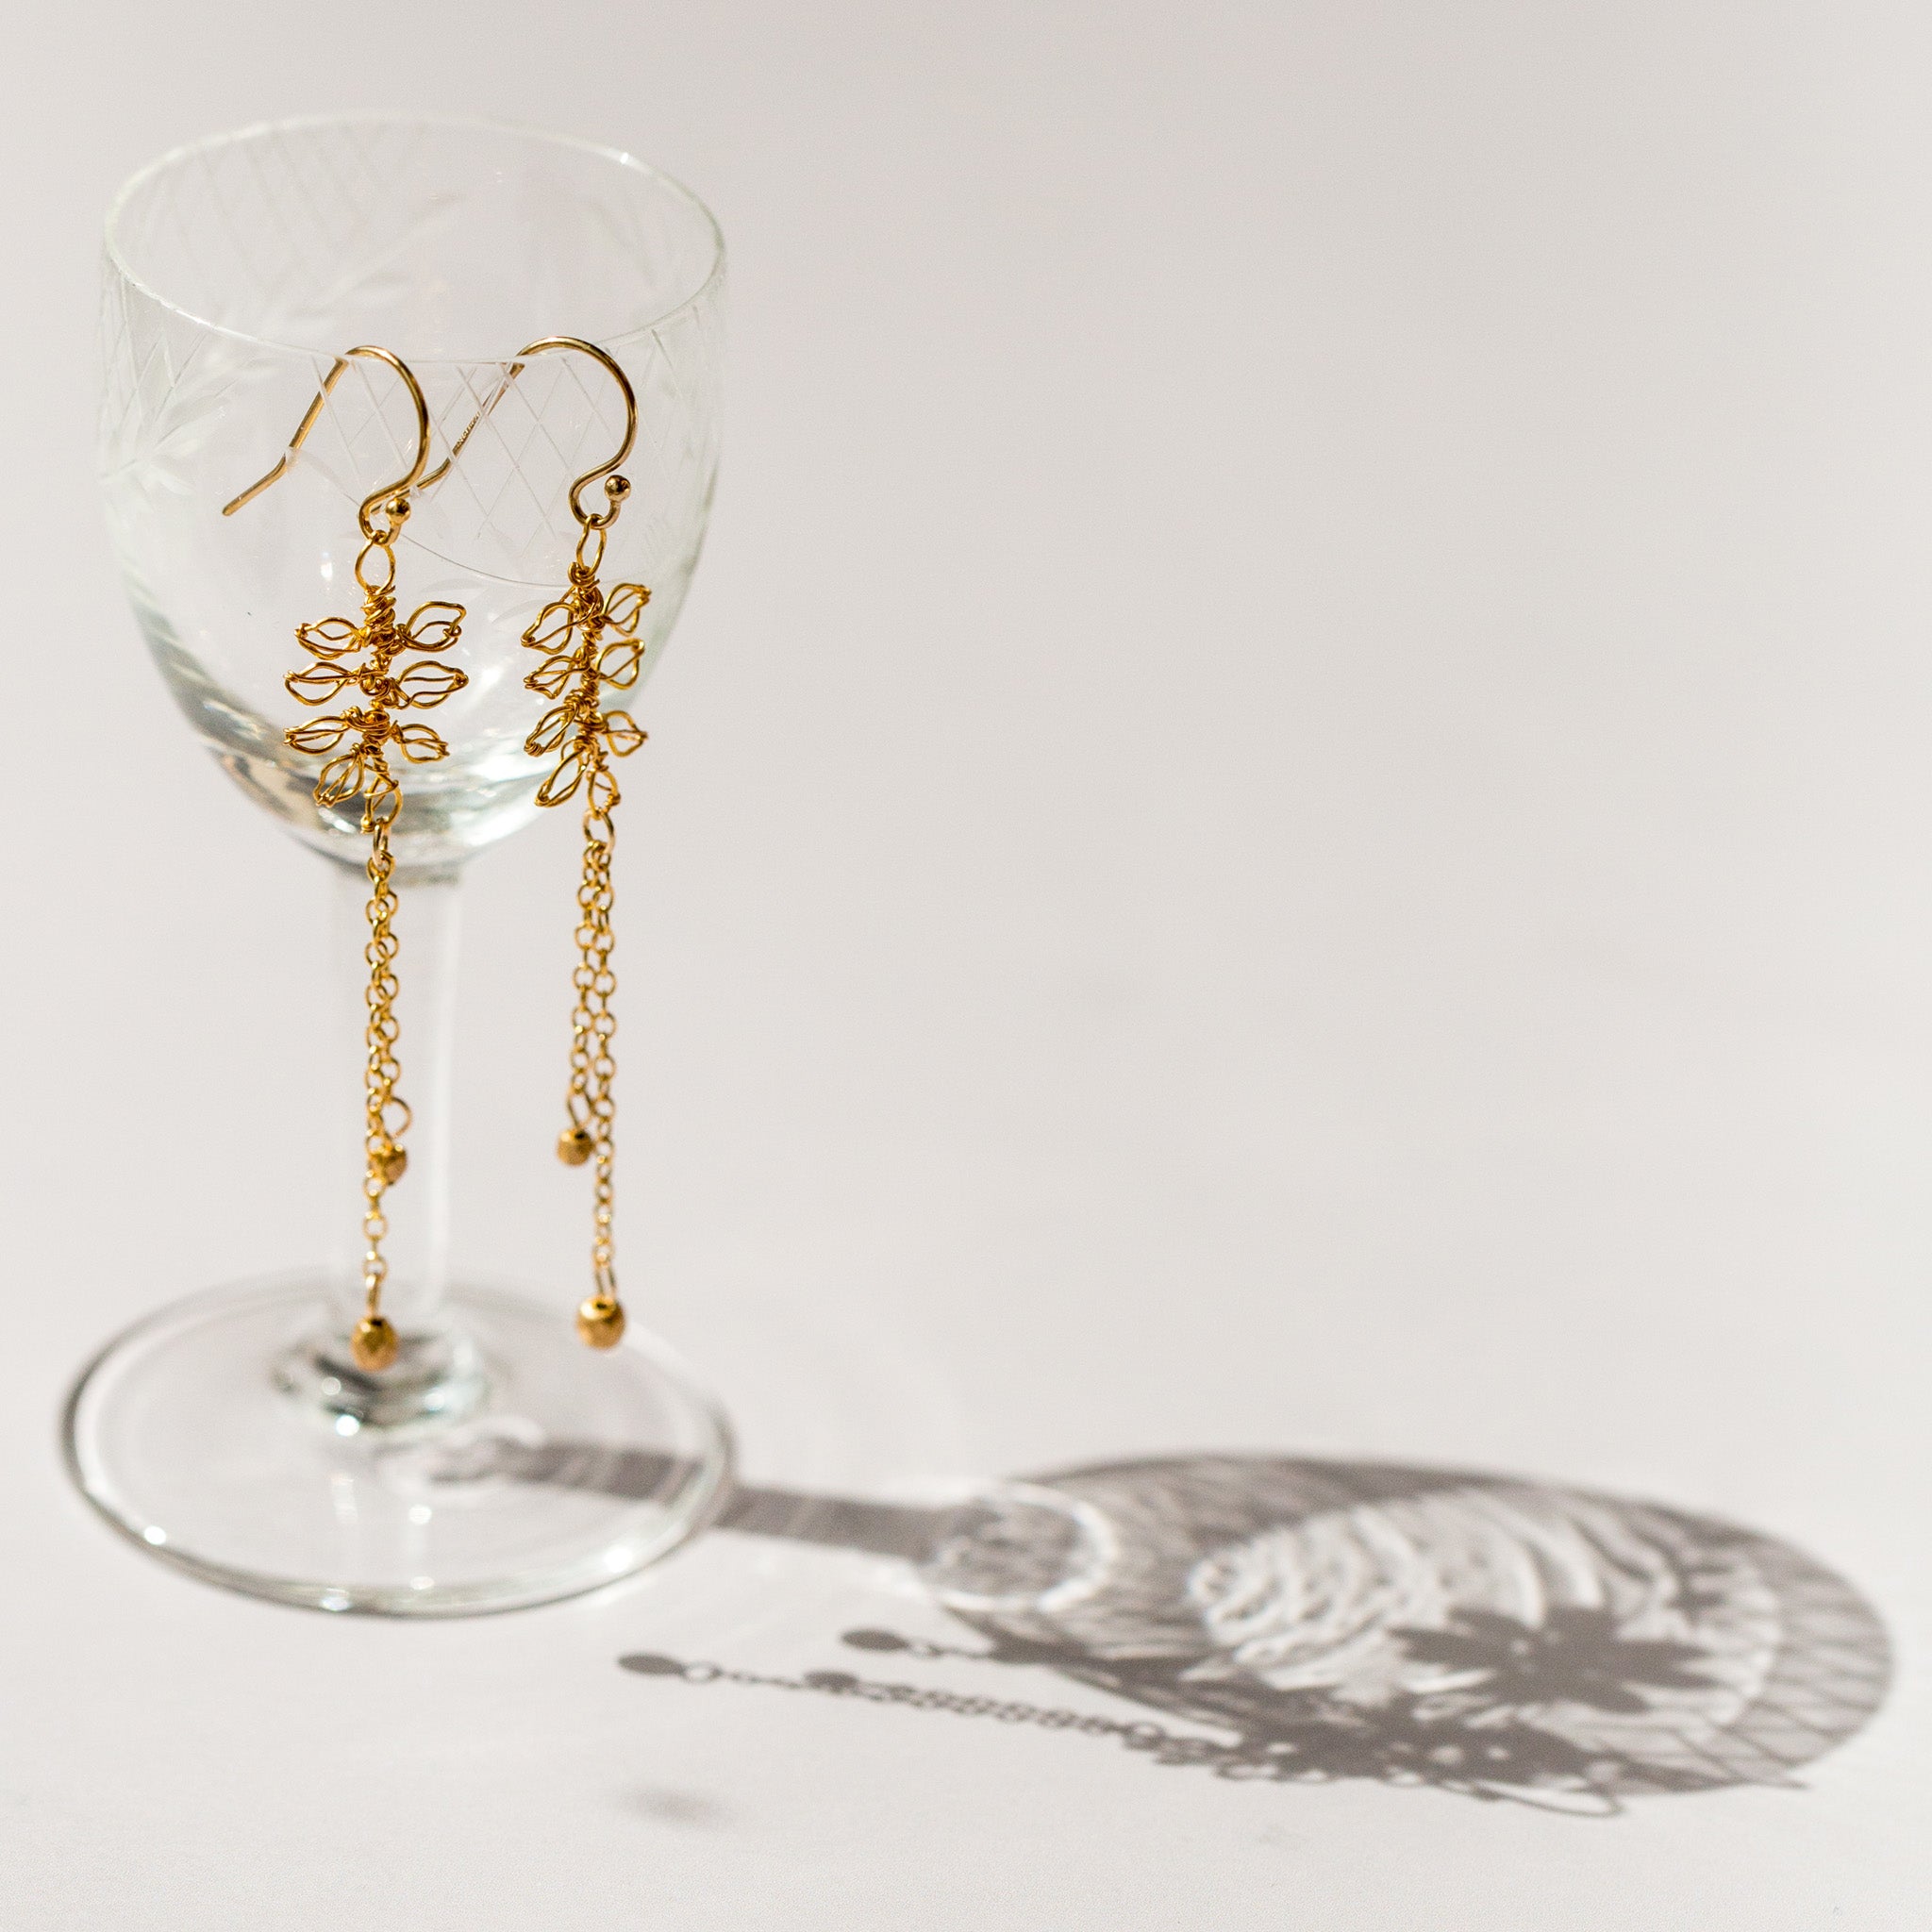 Tiny handmade leaf earrings in gold wire by Judith Brown Bridal